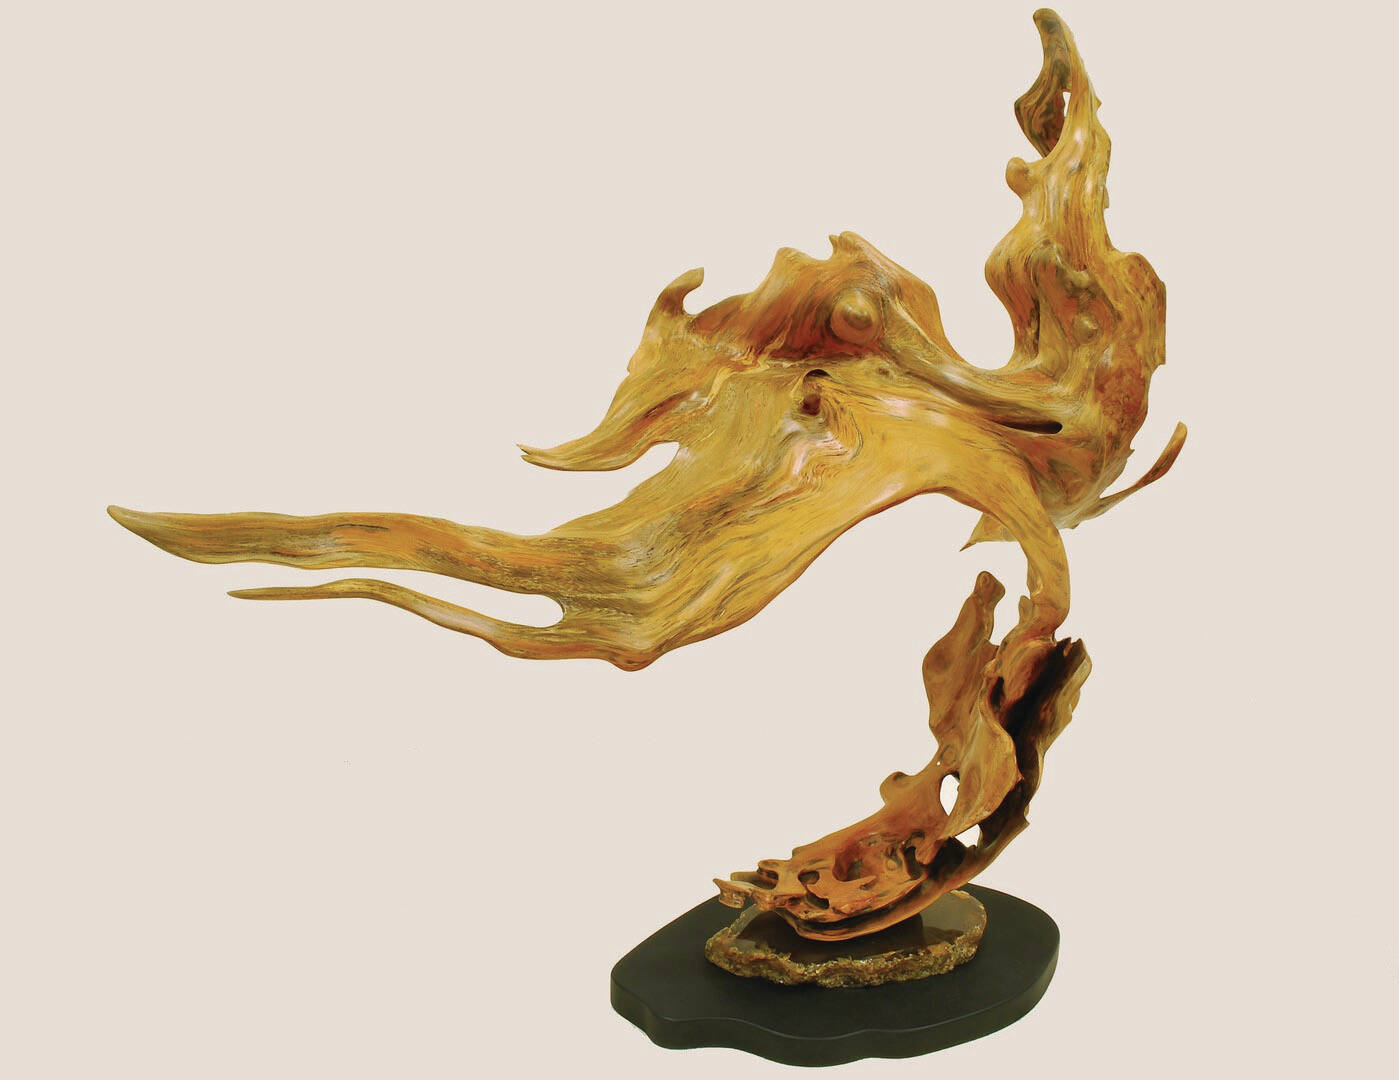 Photo courtesy of Olympic Driftwood Sculptors
“Nebula” by Tuttie Peetz, who, along with other Olympic Driftwood Sculptors, offer their artistry at an exhibit at Sequim Museum & Arts in December.